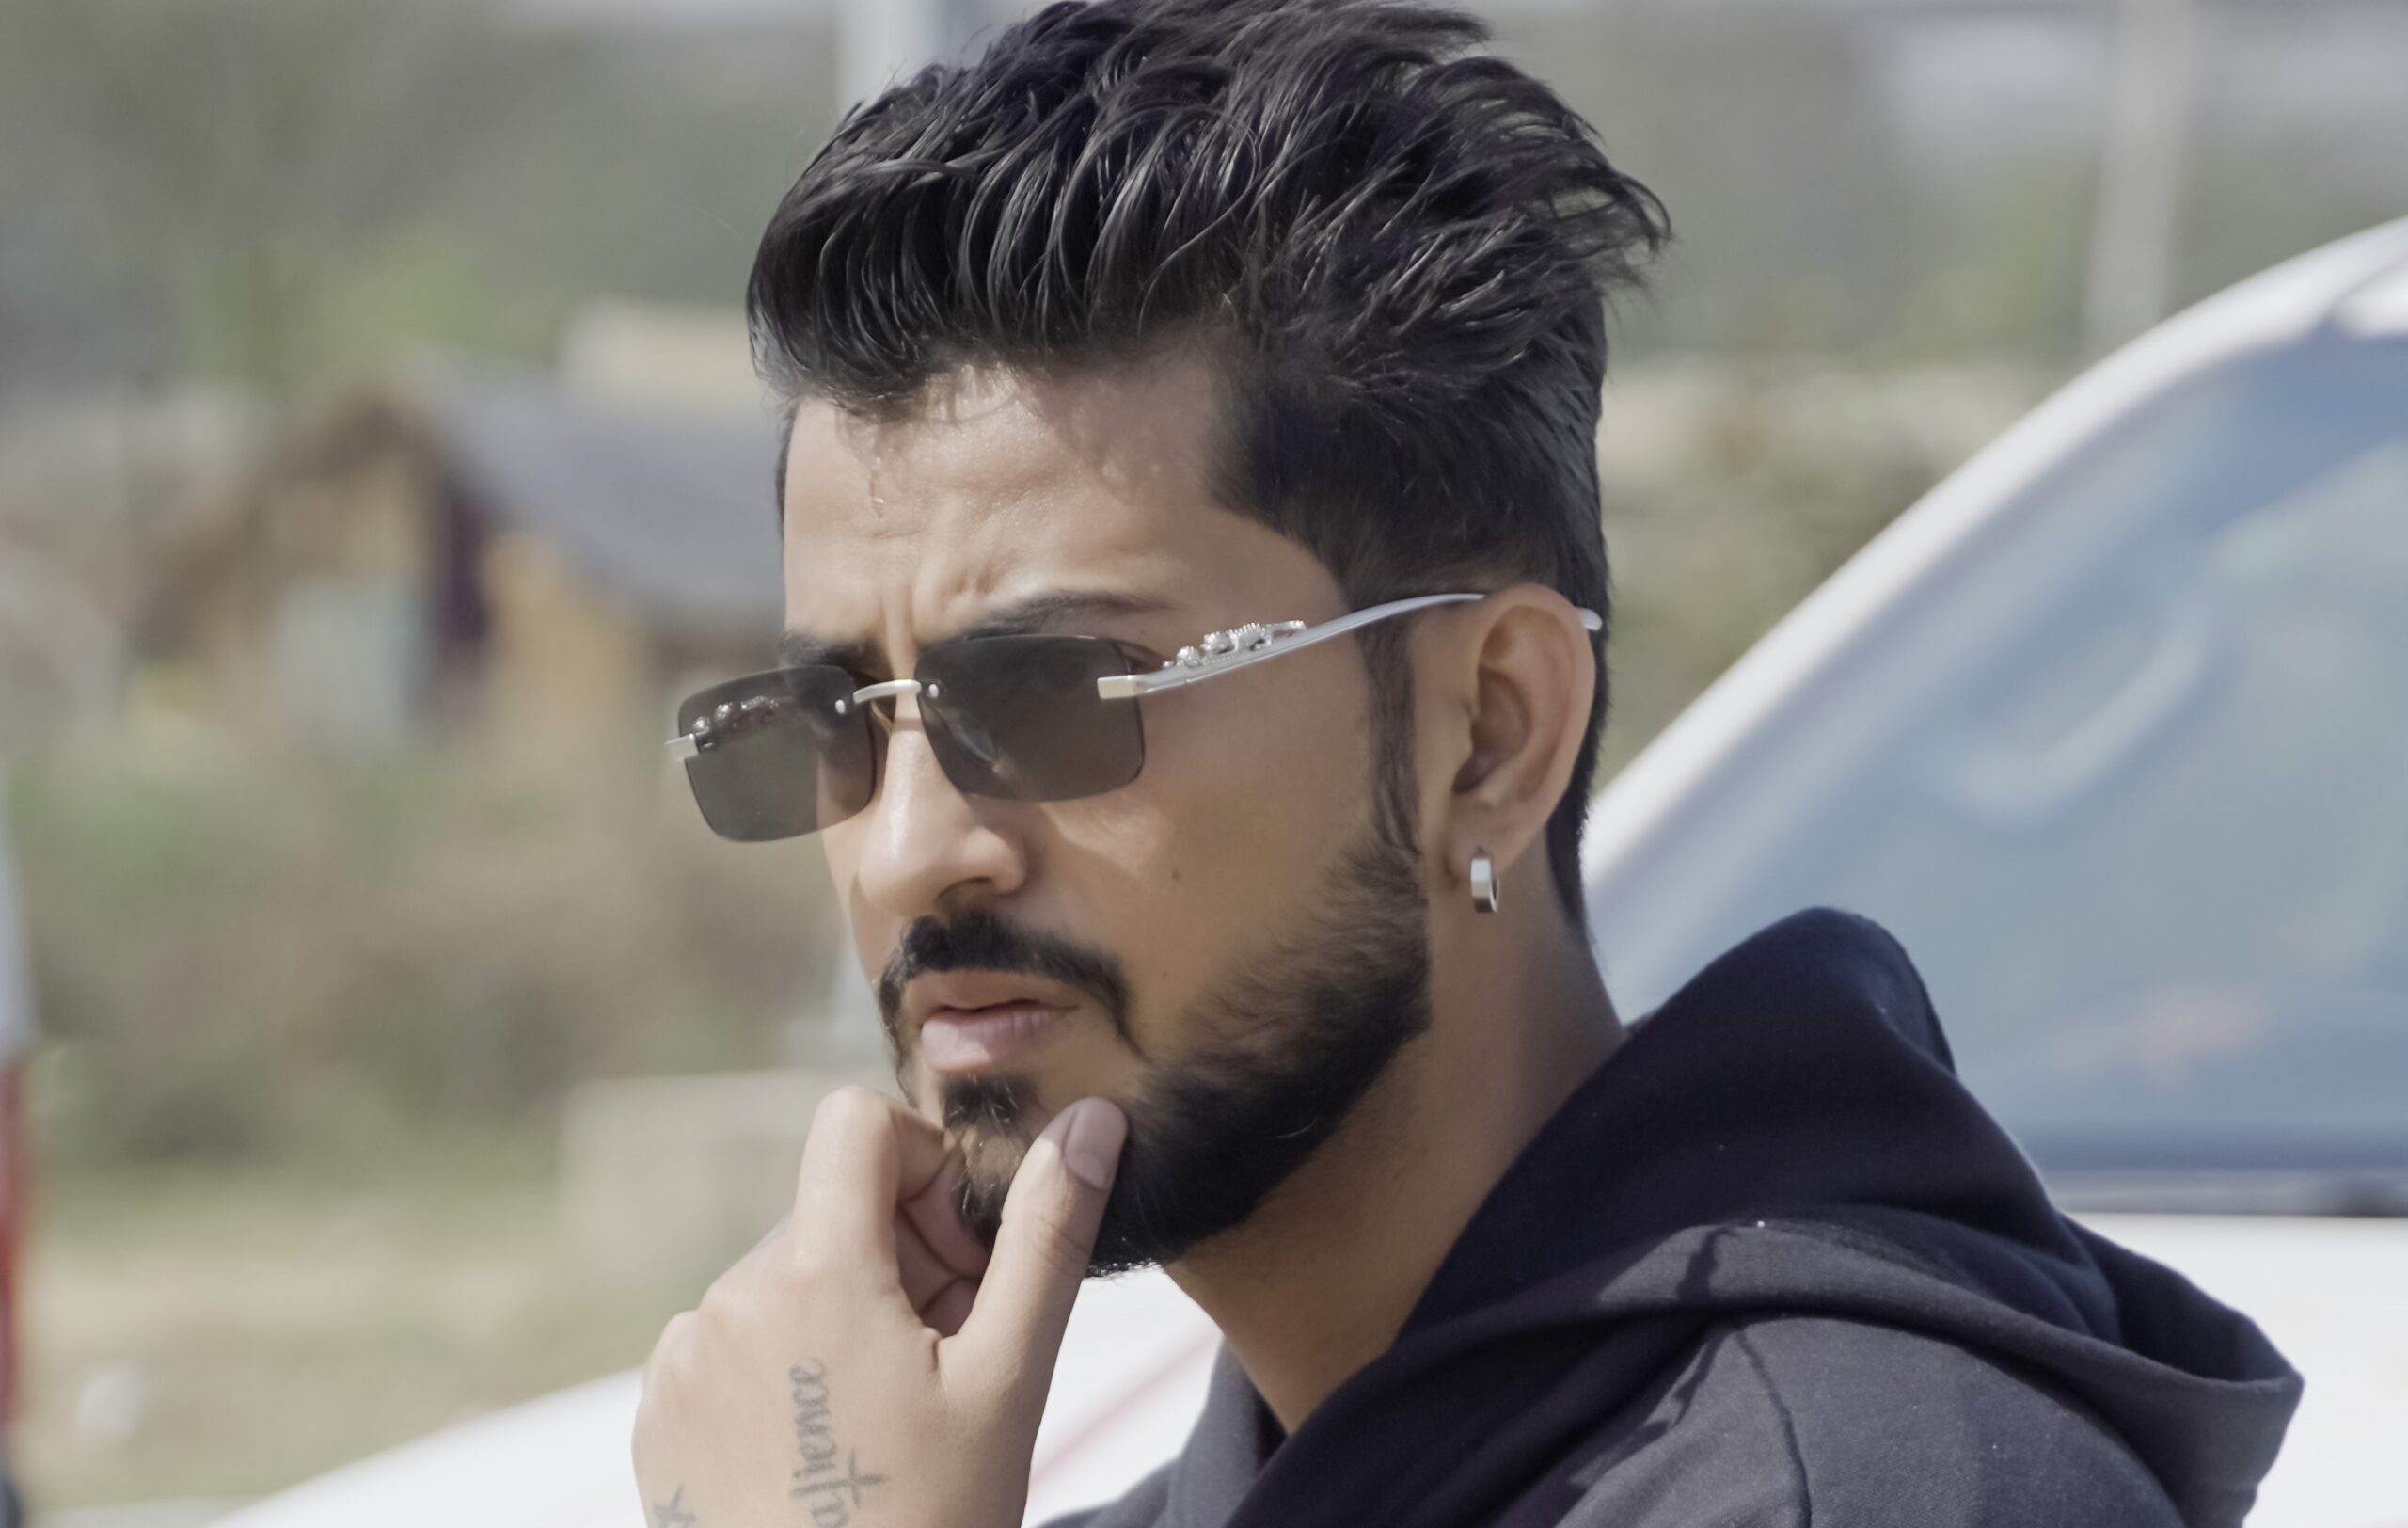 Meet Gurdeep Singh Garry: The 28-Year-Old Music Prodigy from Ghaziabad Making Waves with Hit WebSeries Tracks and Star-Studded Collaborations.